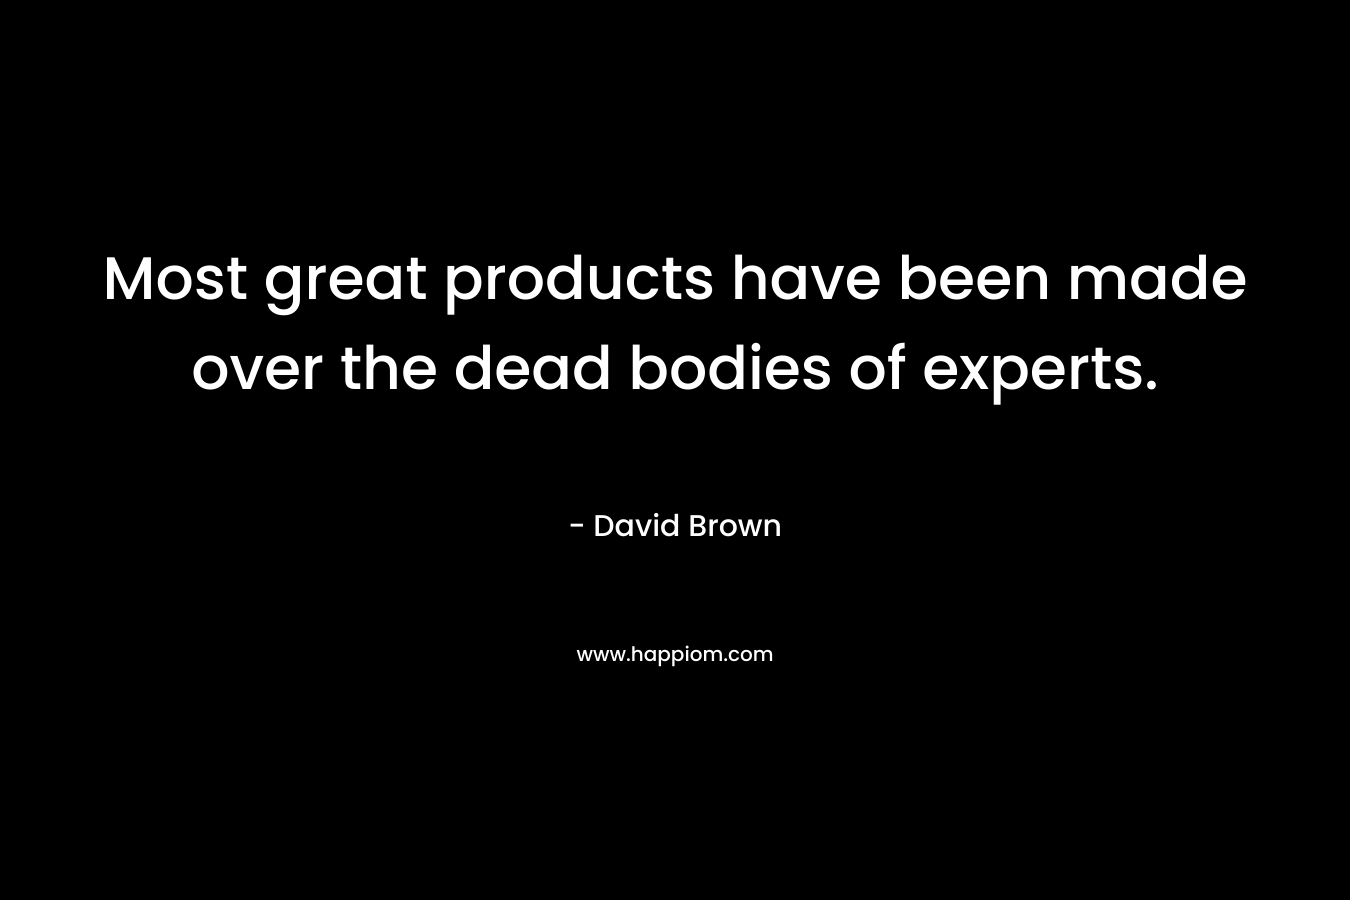 Most great products have been made over the dead bodies of experts.